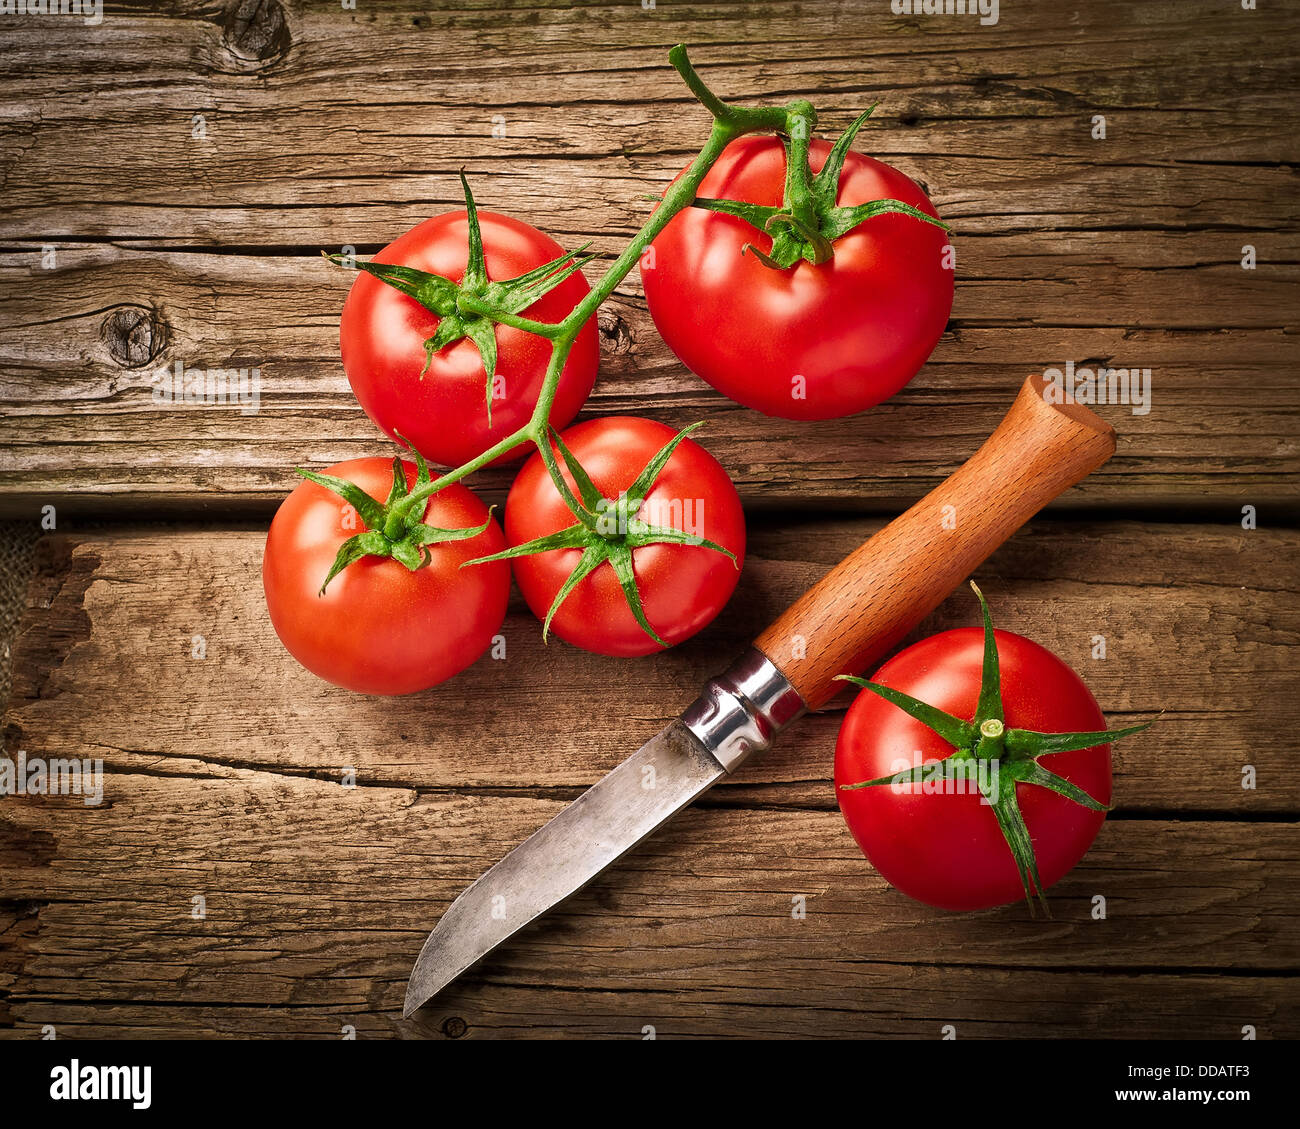 Fresh organic ripe tomatoes and steel knife on wooden table. Image in vintage style Stock Photo